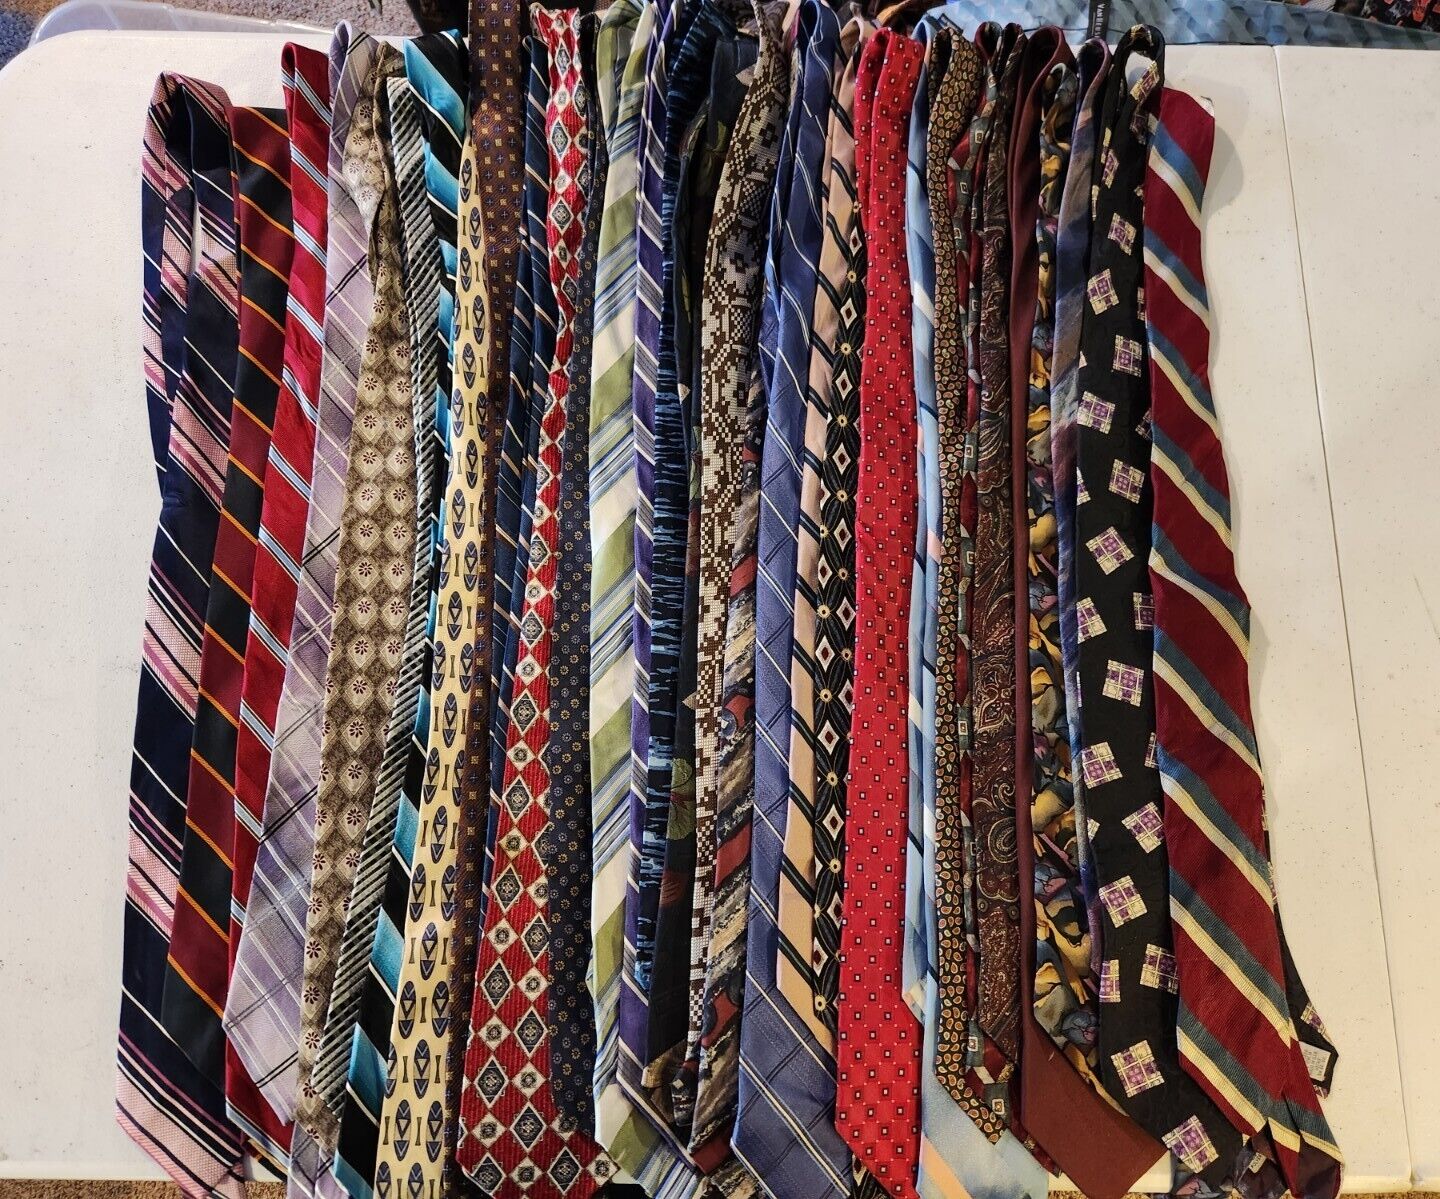 Men’s Modern/Vintage Neck Ties Lot Of 50 For Wear or Craft Or Reselling 